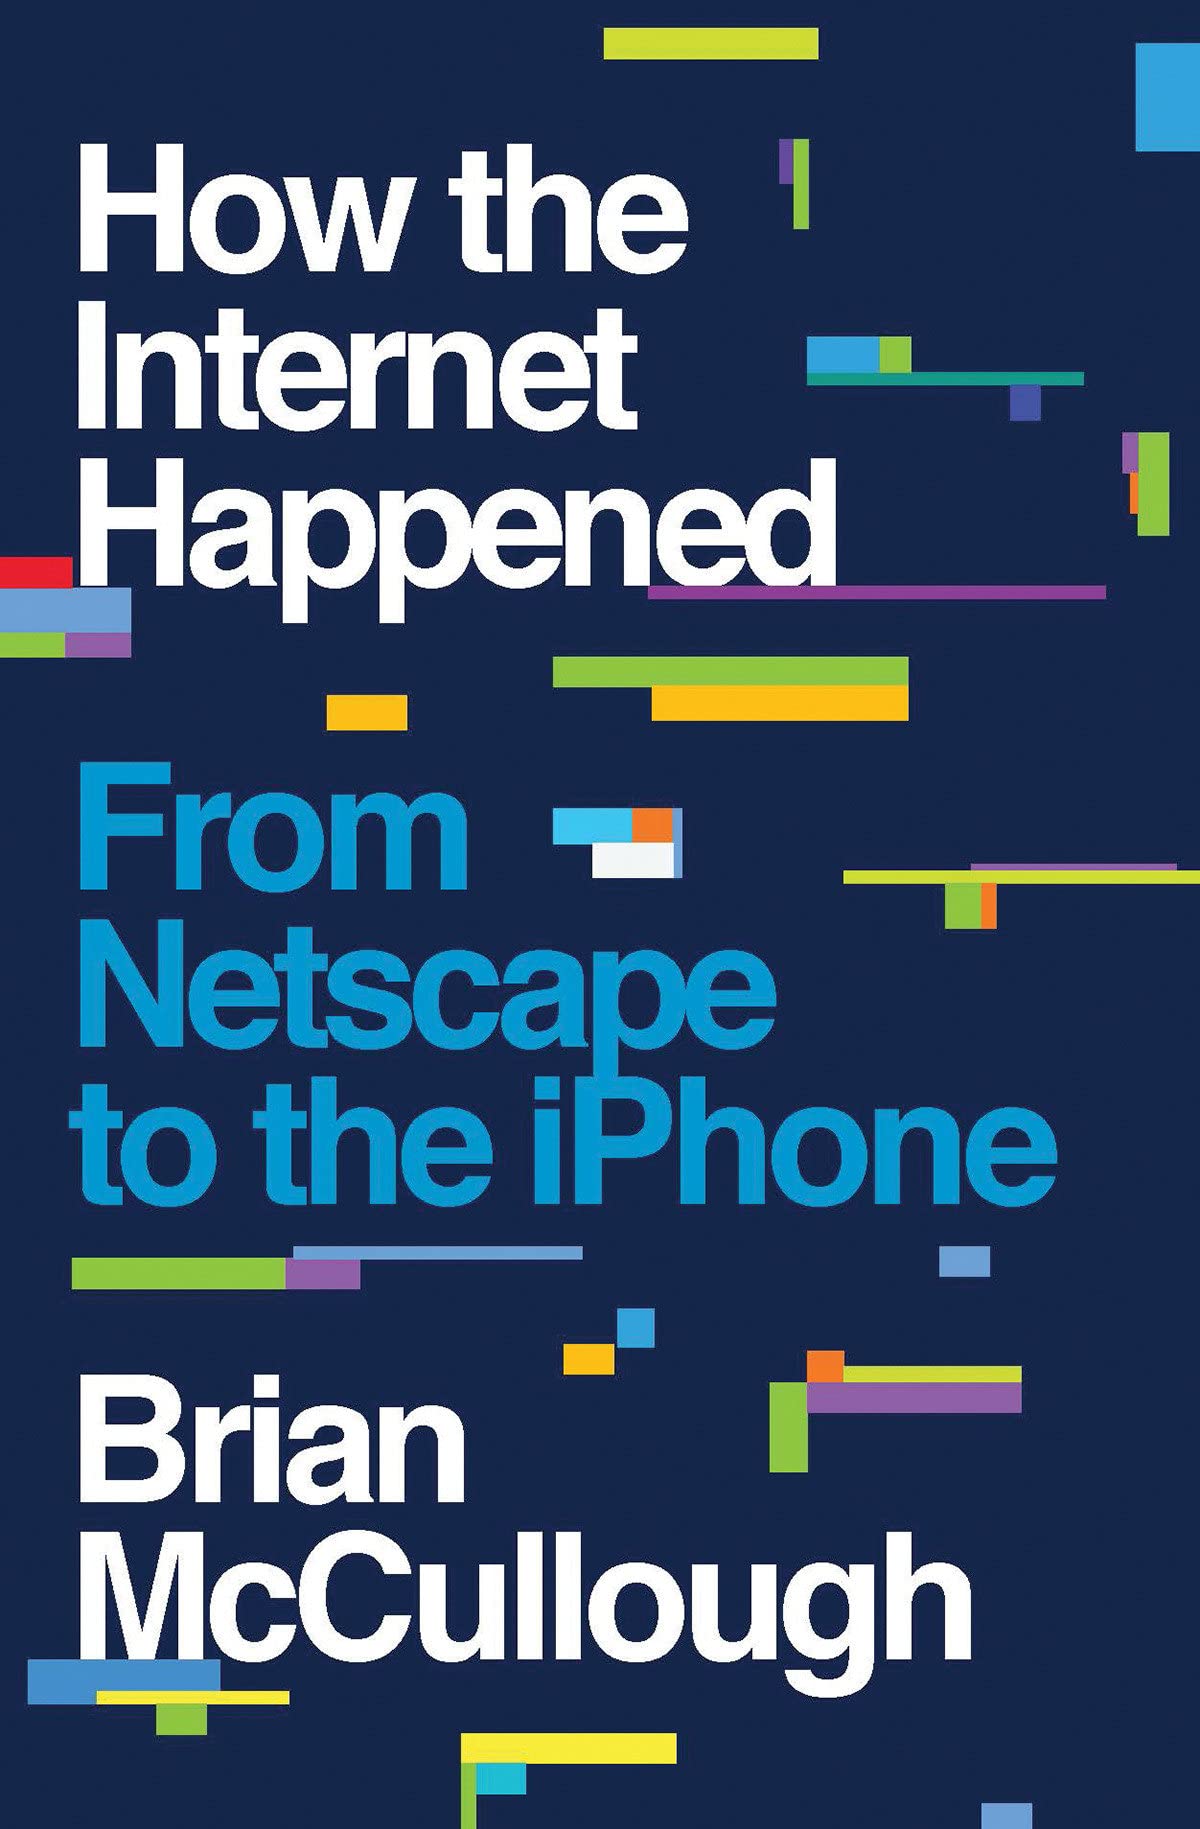 Brian McCullough: How the Internet Happened (2018)